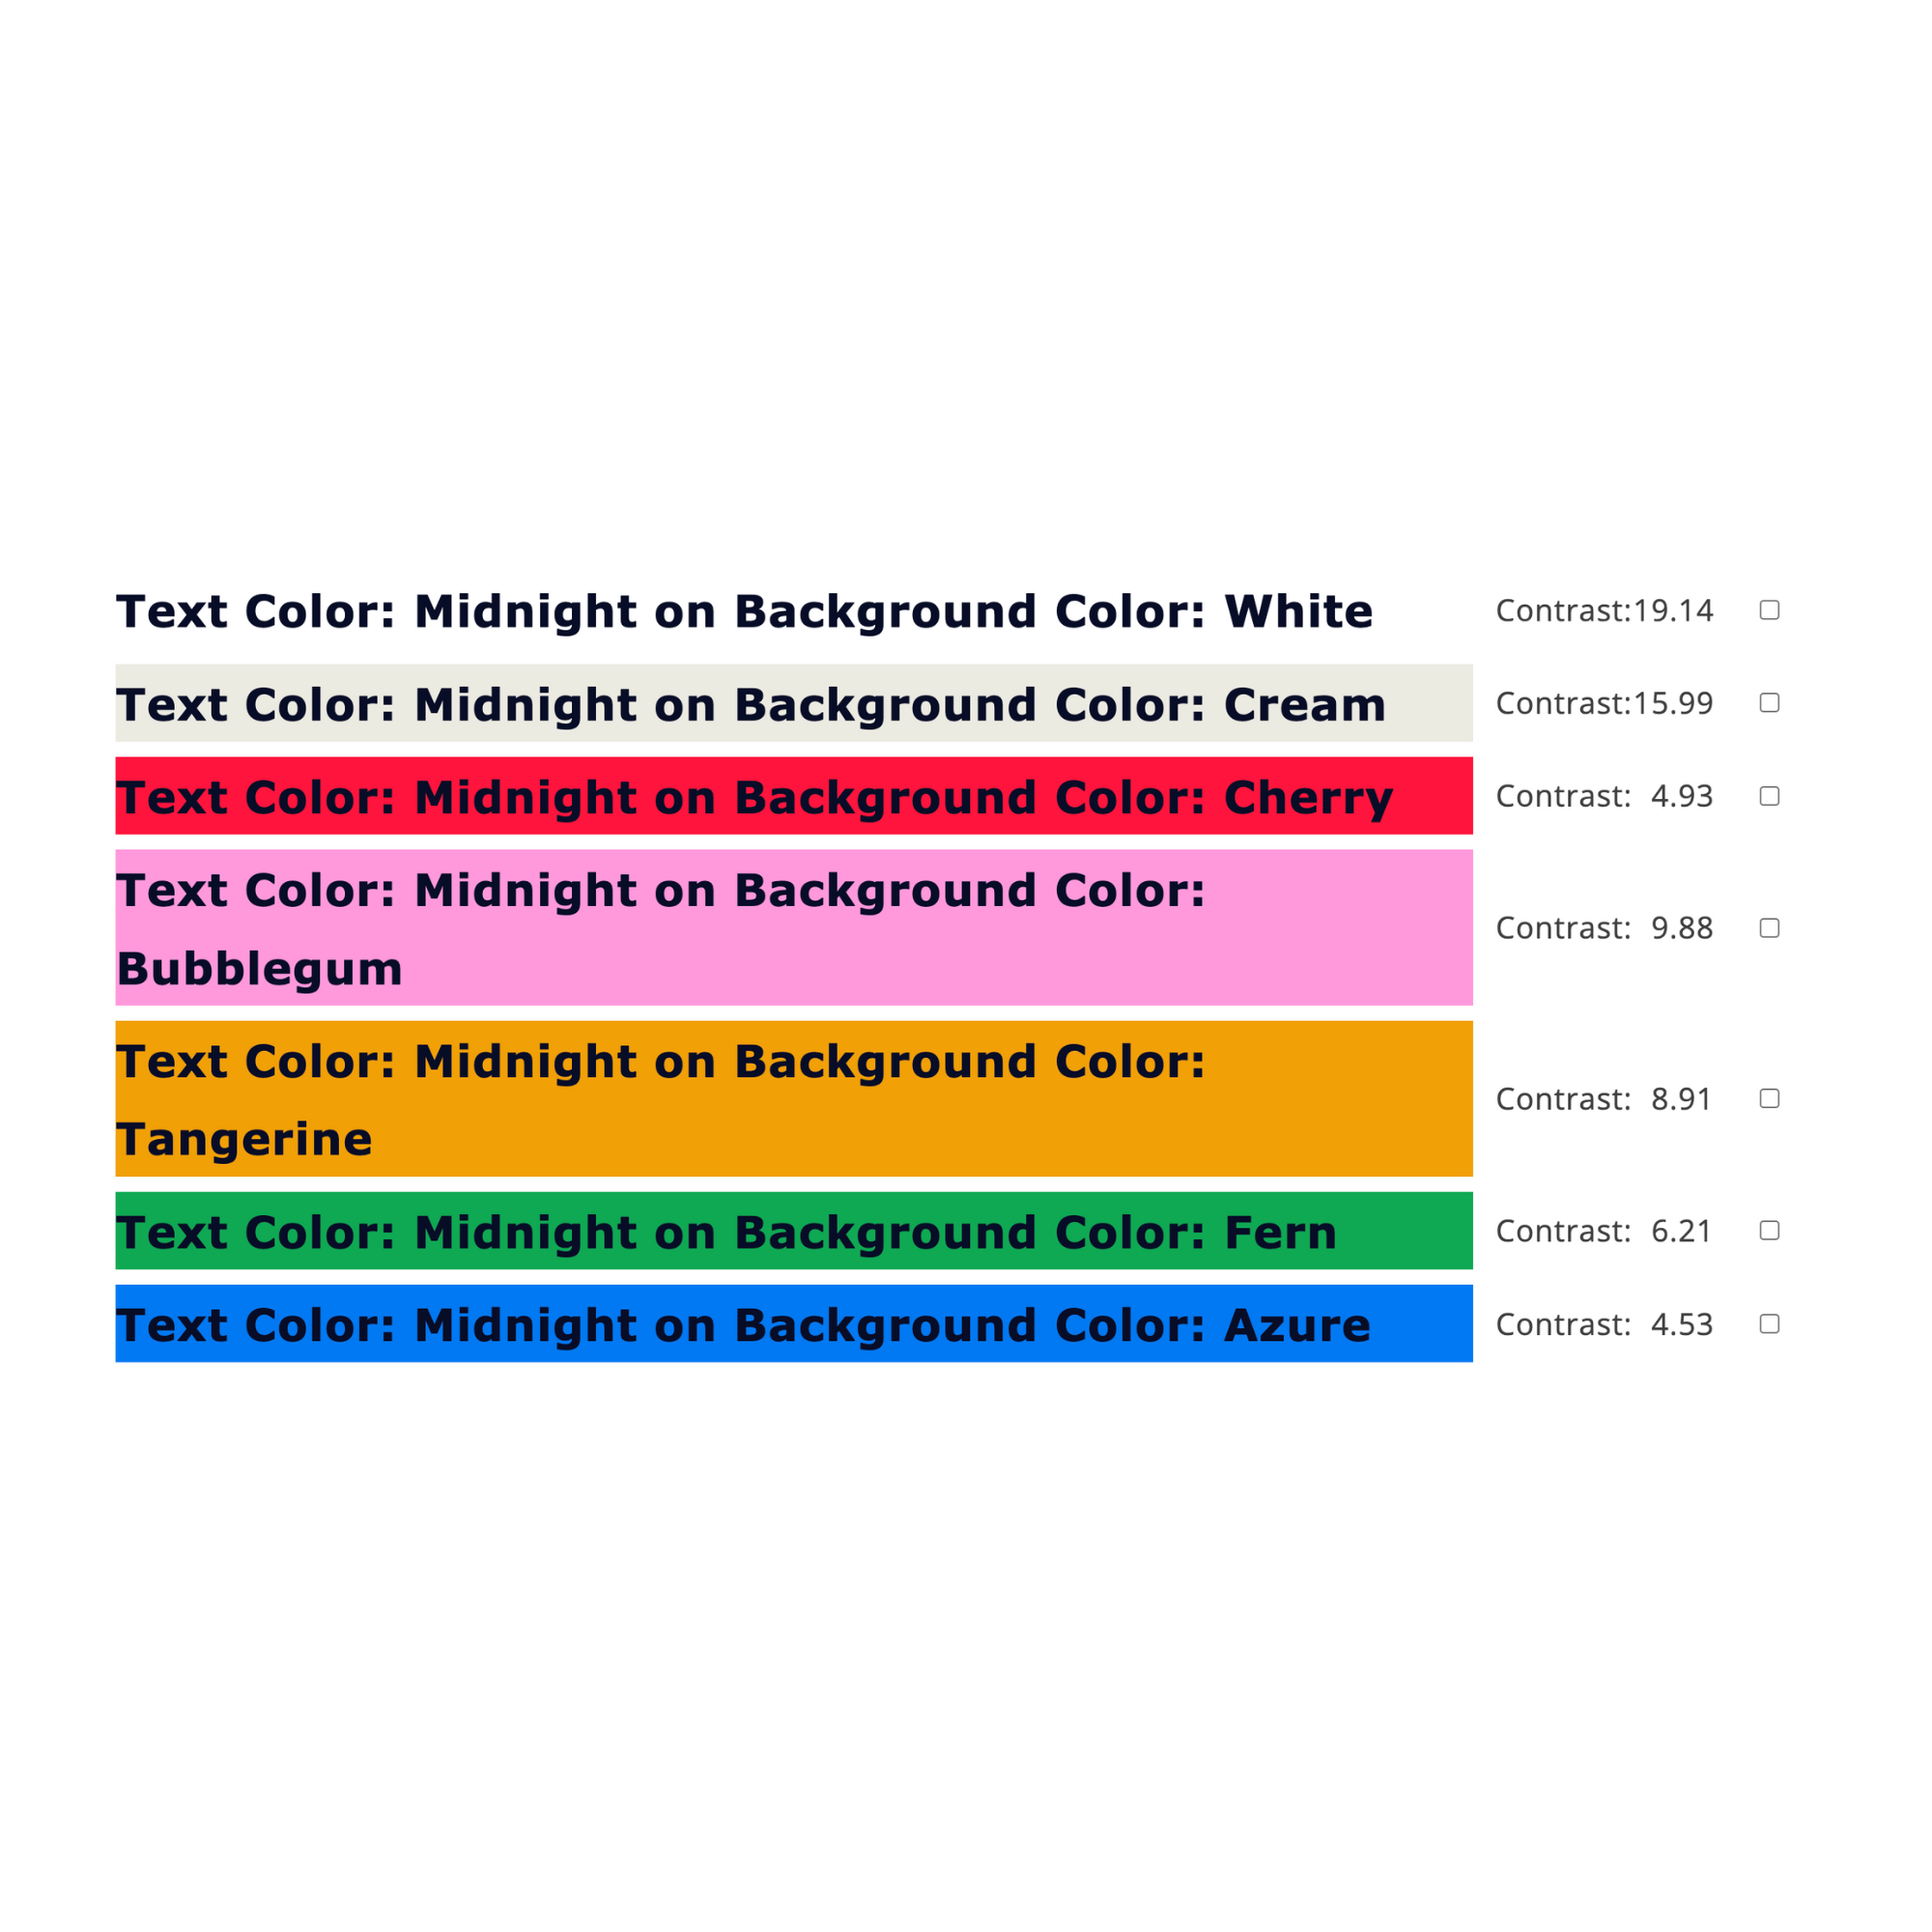 A screenshot of a series of text and background colors being tested for color contrast. Contrast levels range from 4.53 - 19.14. The color palette is bold and bright with a Bauhaus theme.